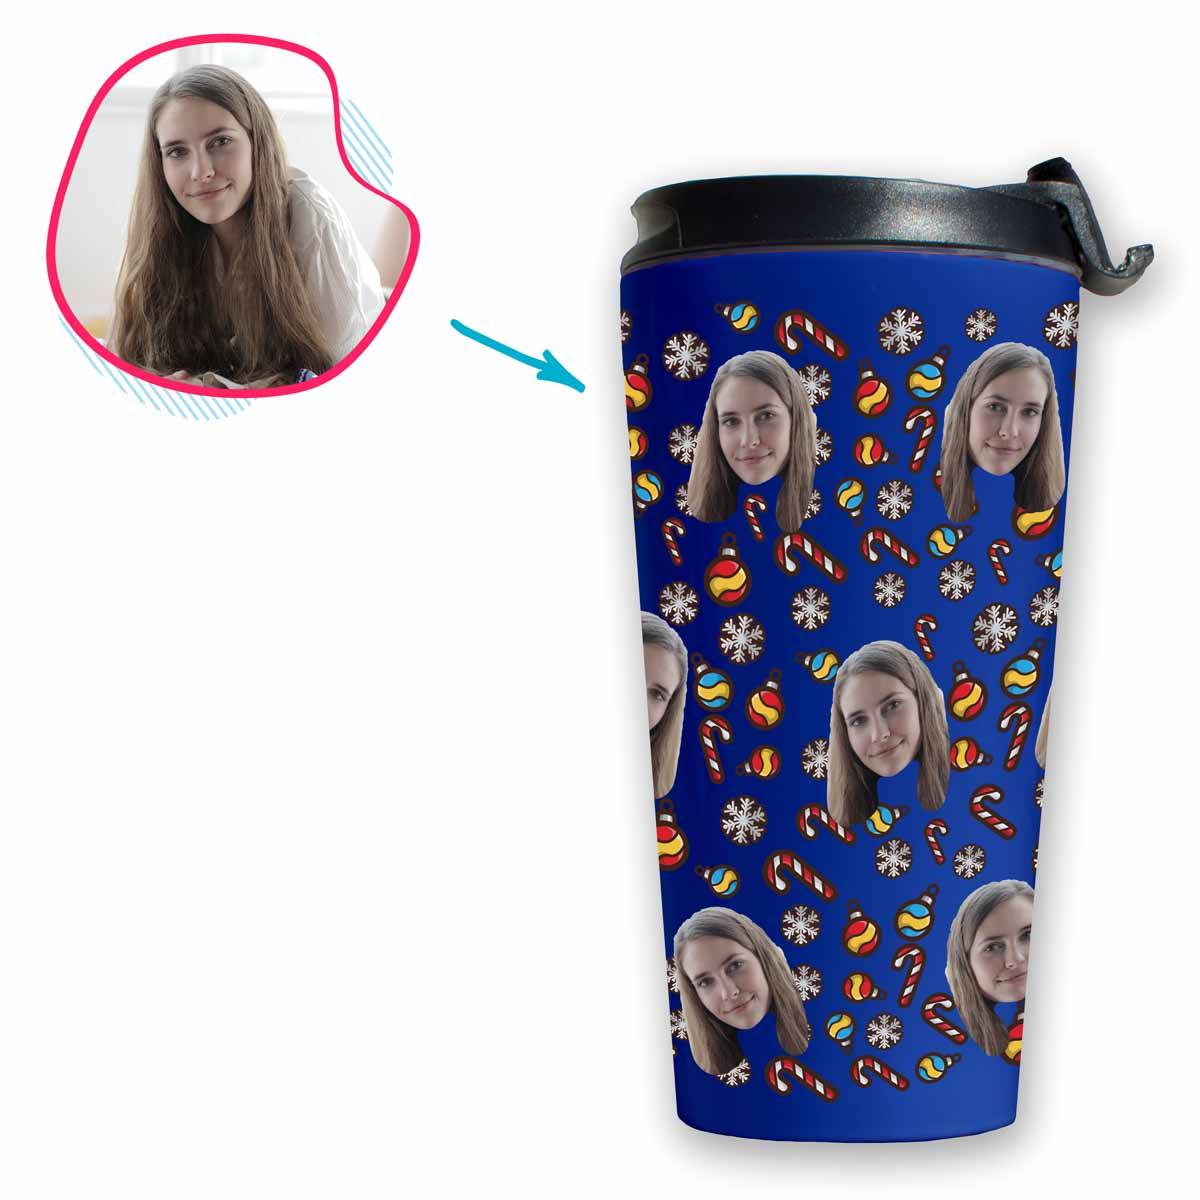 darkblue Christmas Tree Toy travel mug personalized with photo of face printed on it